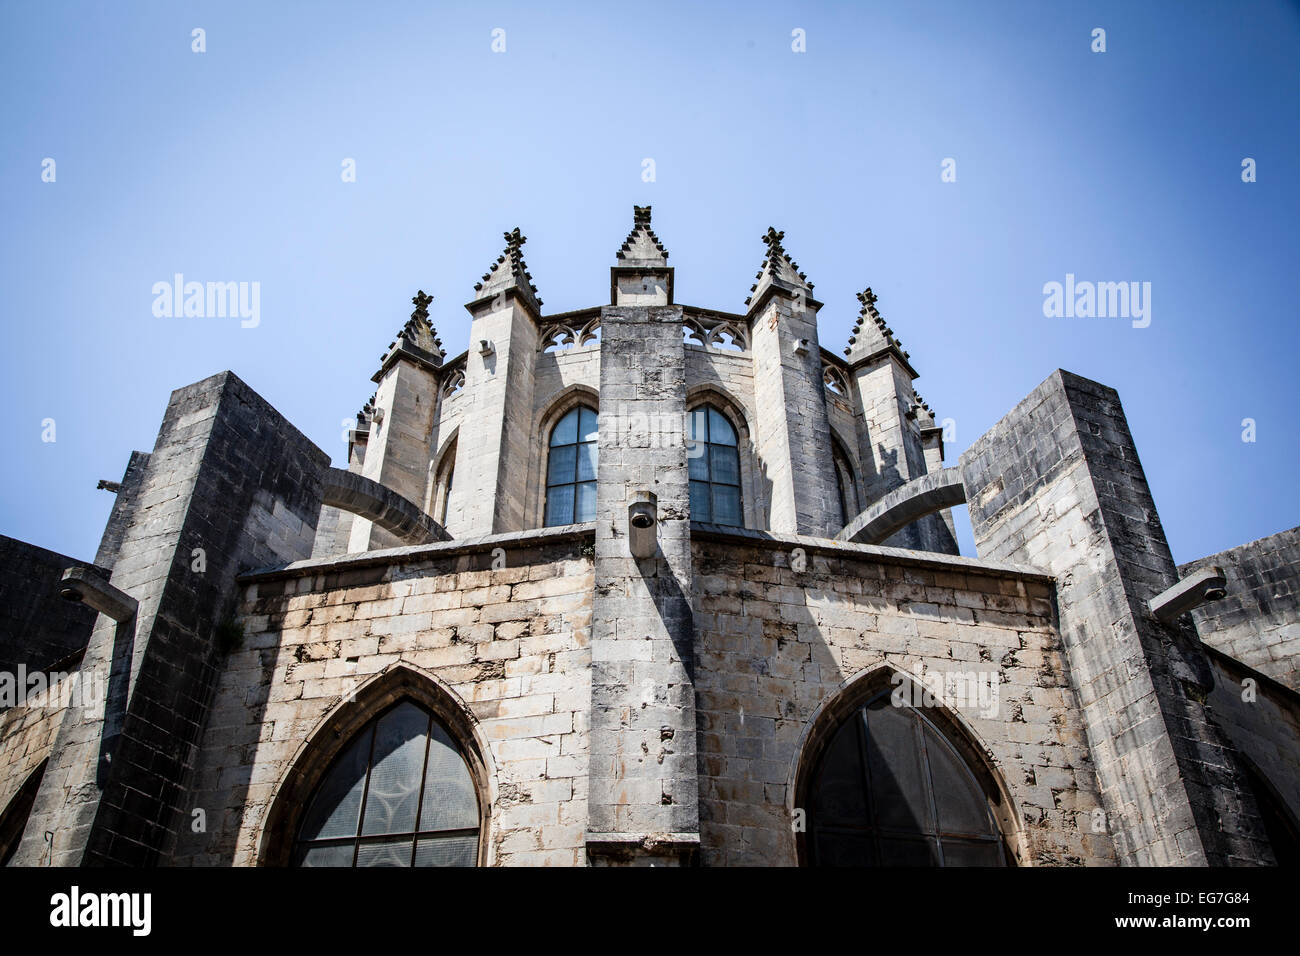 View of Girona - Gothic Cathedral Stock Photo